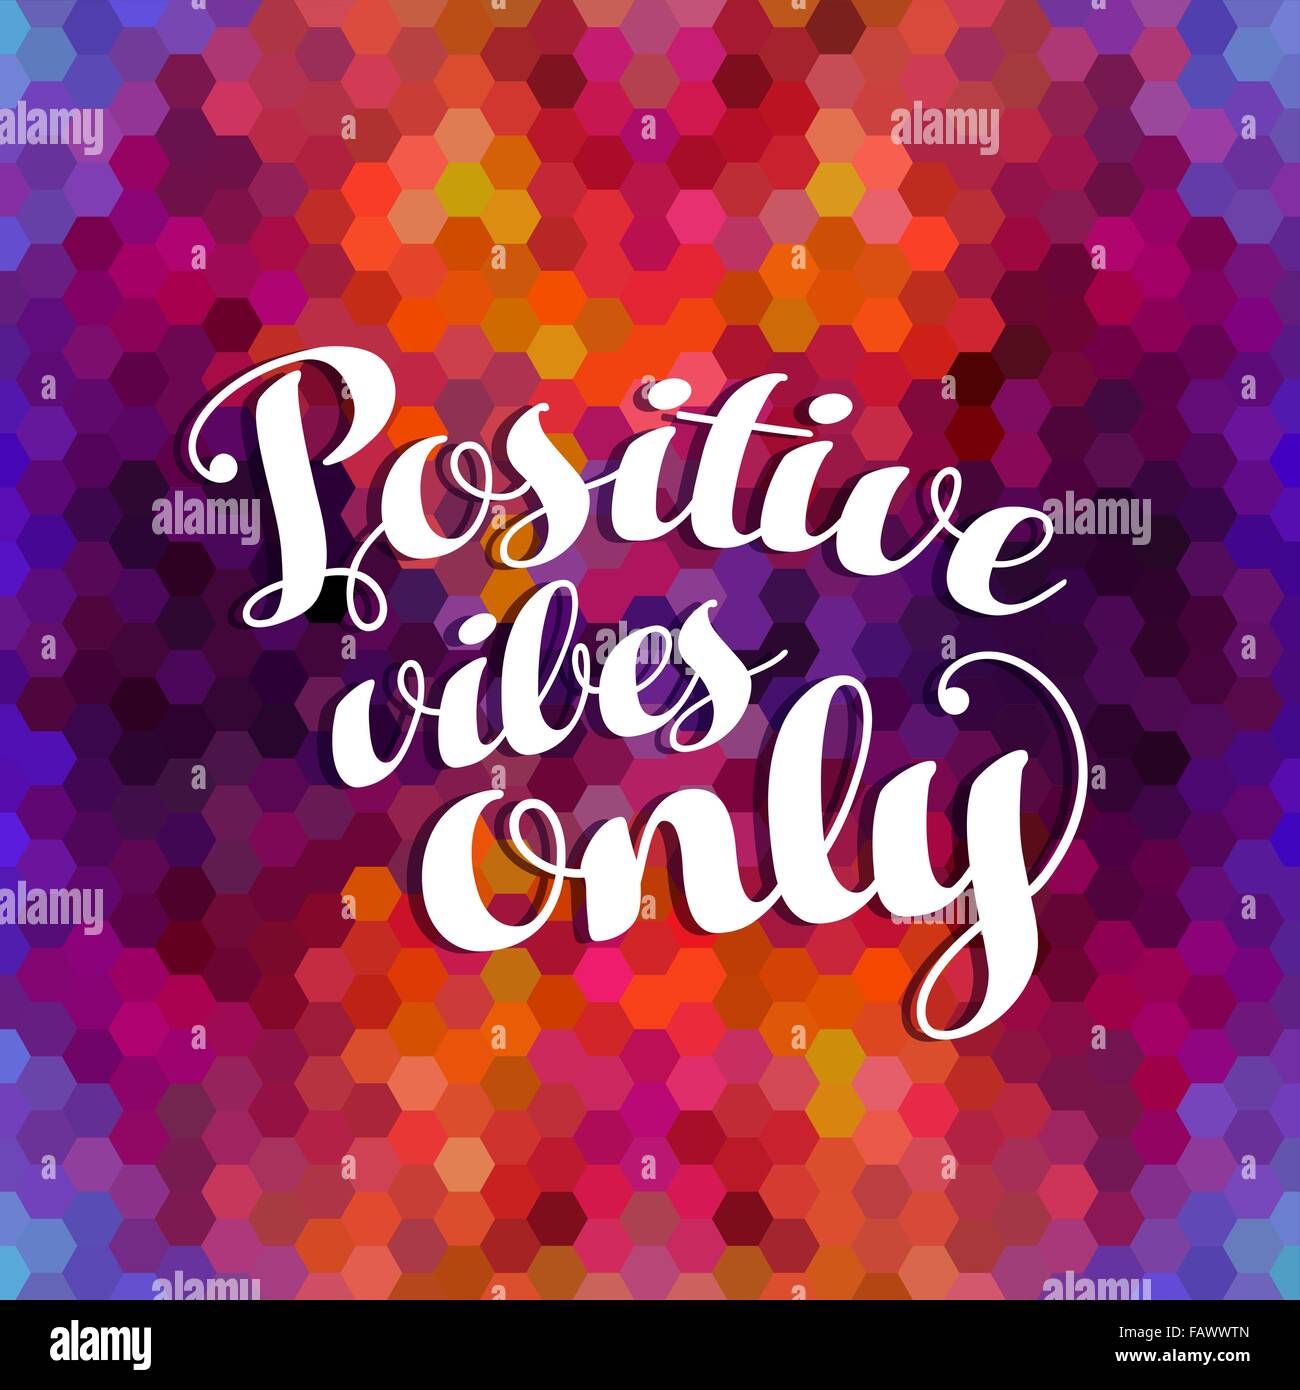 Positive vibes only: positivity concept poster design, inspiration quote on colorful grid mosaic background. EPS10 vector. Stock Vector